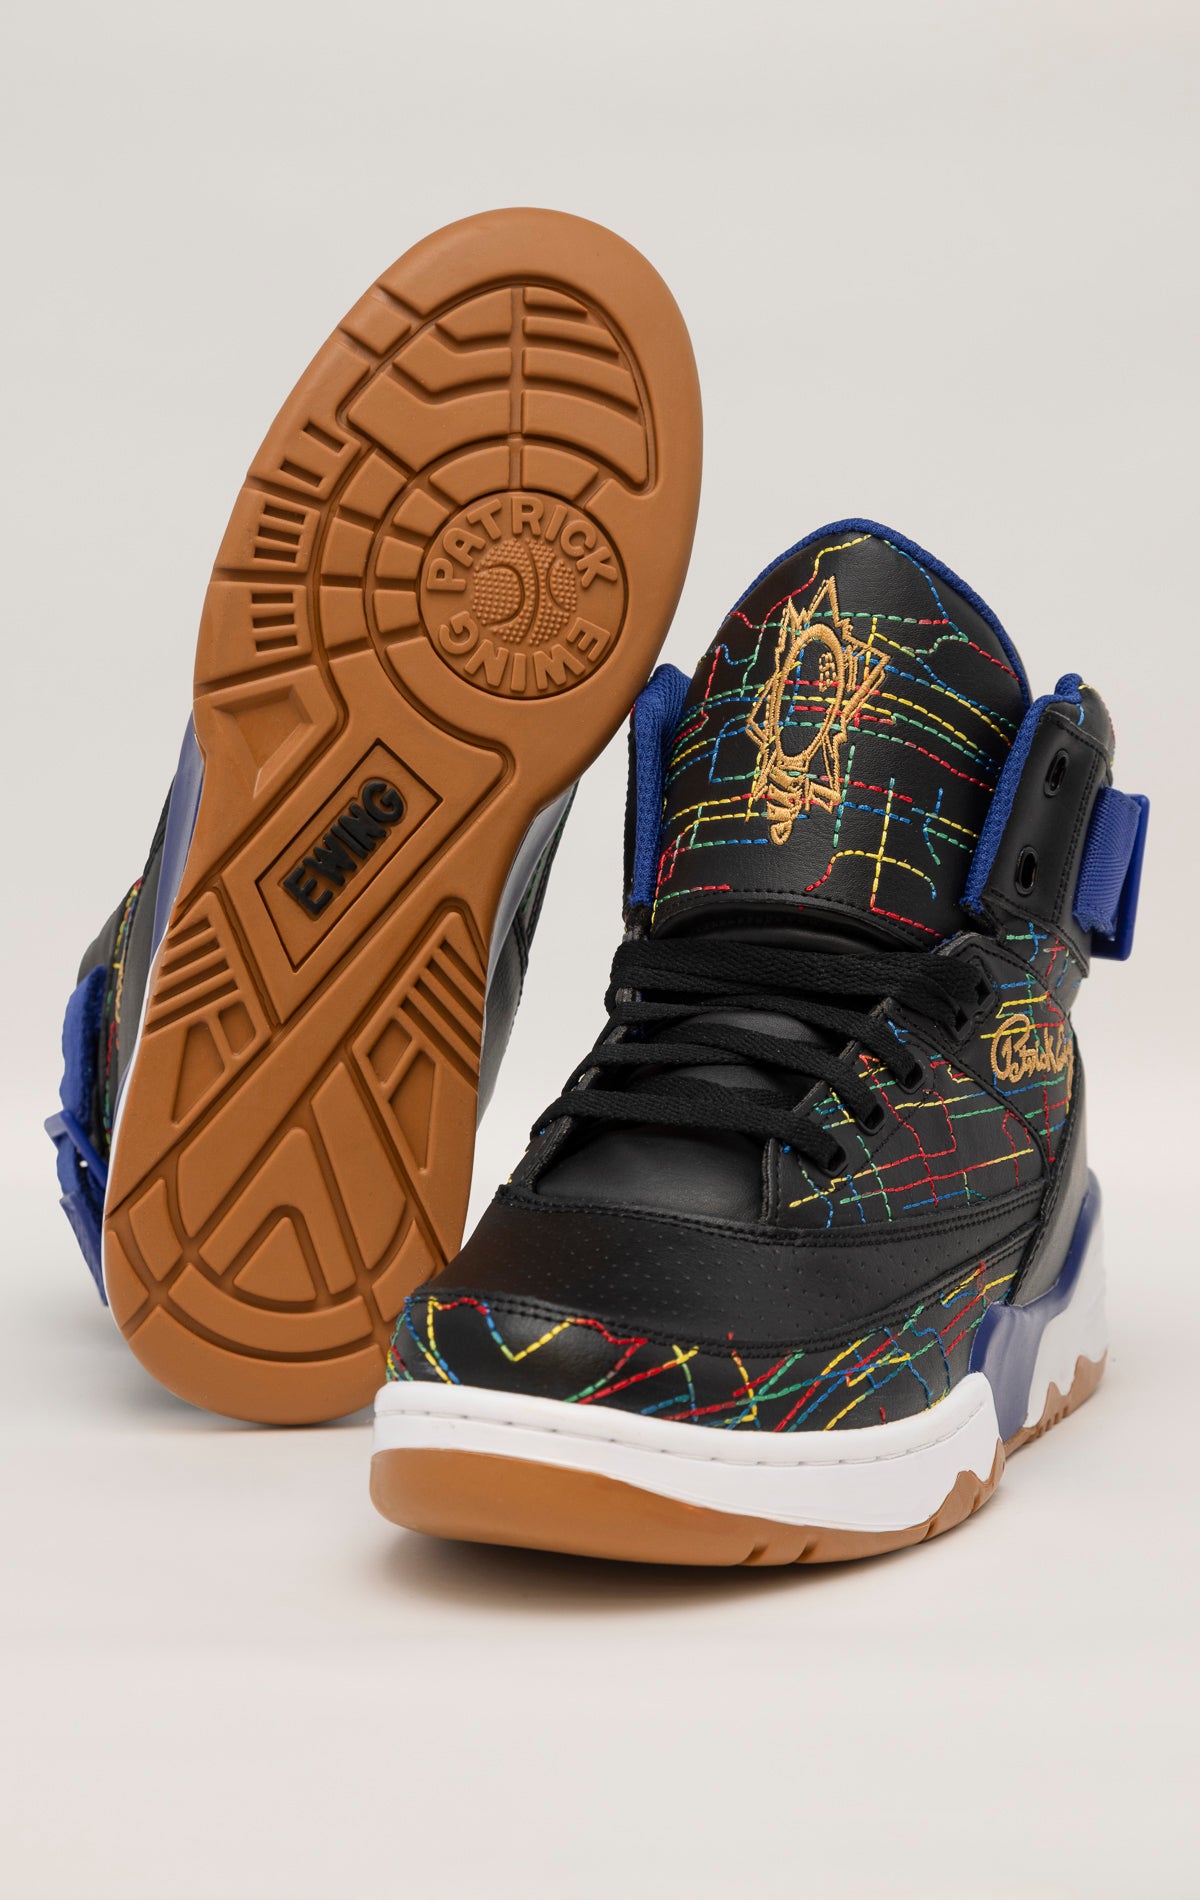 Multi high-top sneakers by Ewing Athletics with a collaboration with rapper Common. Features a cartoon graphic on the side and multicolored accents.